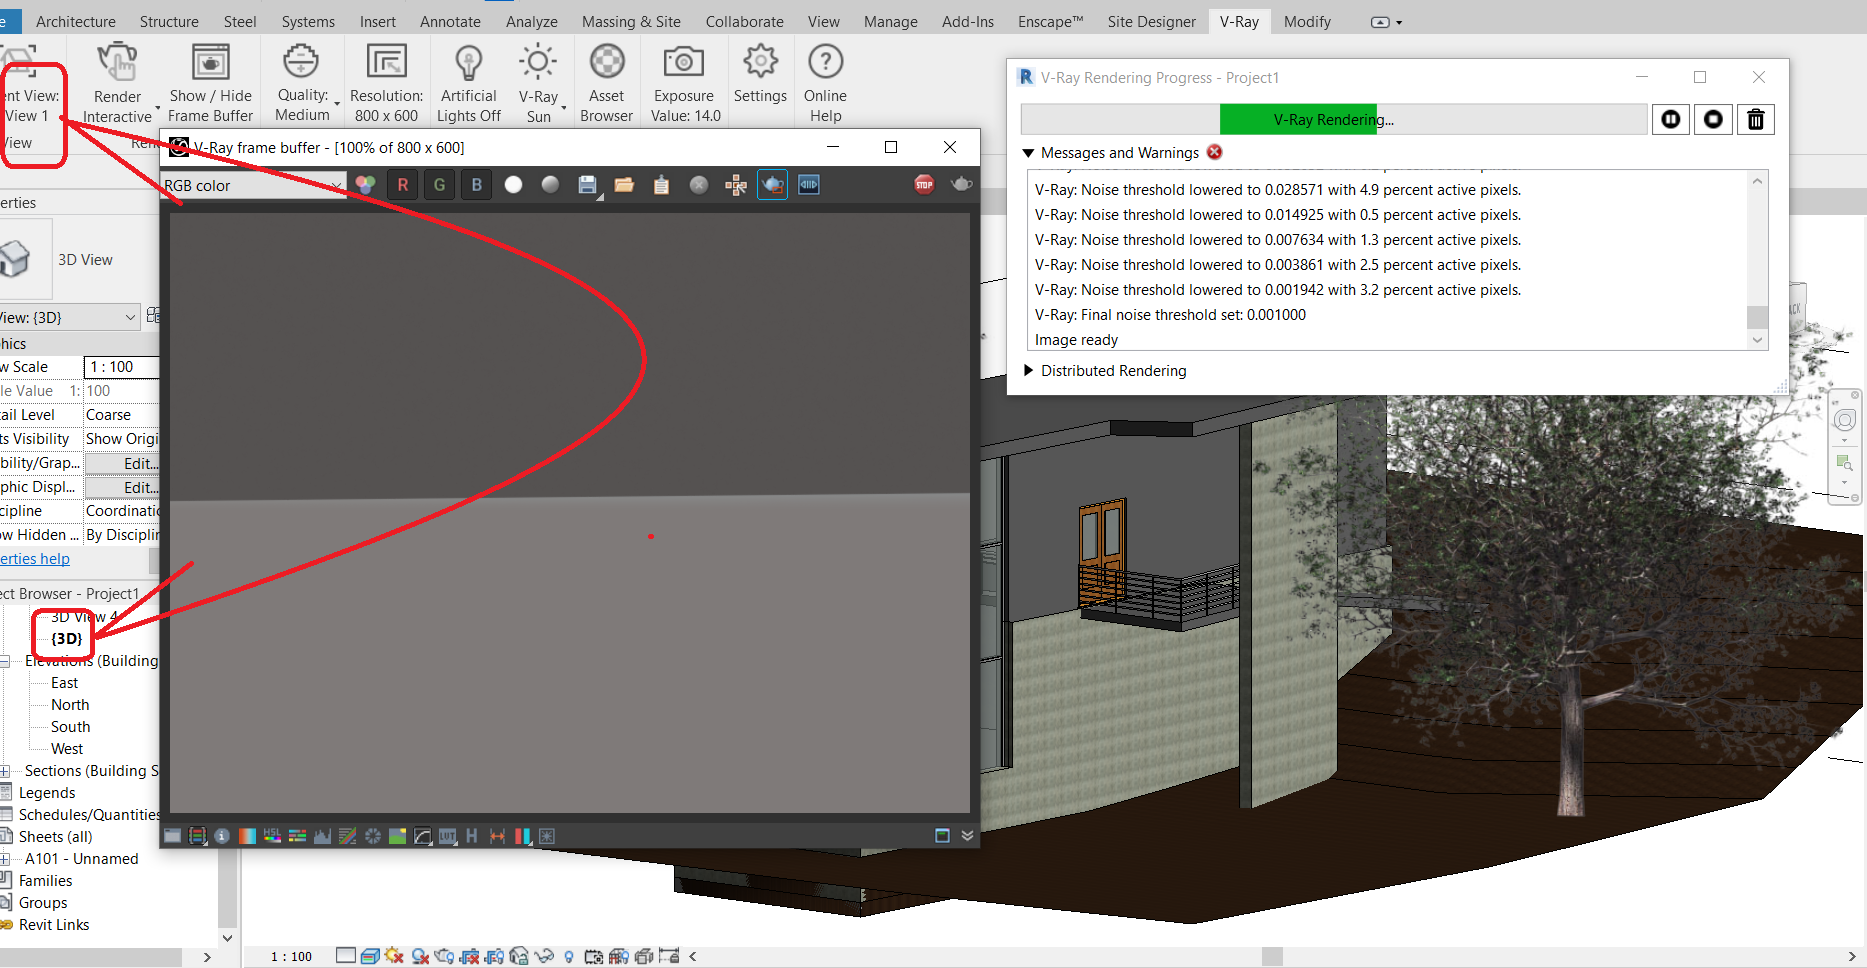 Solved: Vray frame buffer not showing render - Autodesk Community - Revit  Products